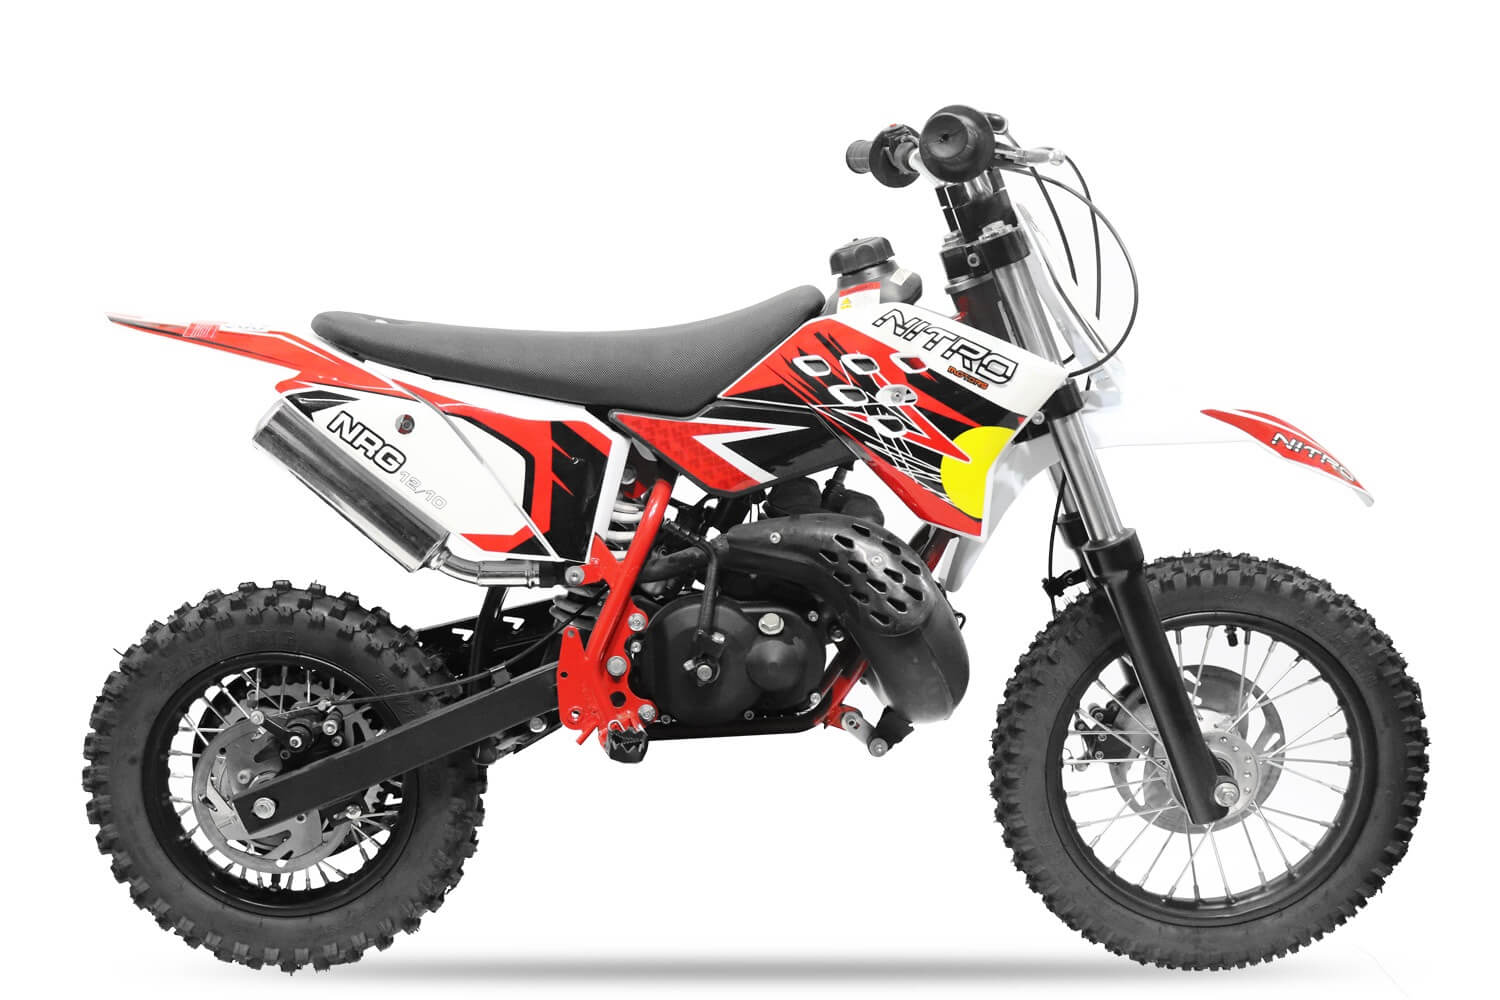 used small dirt bikes